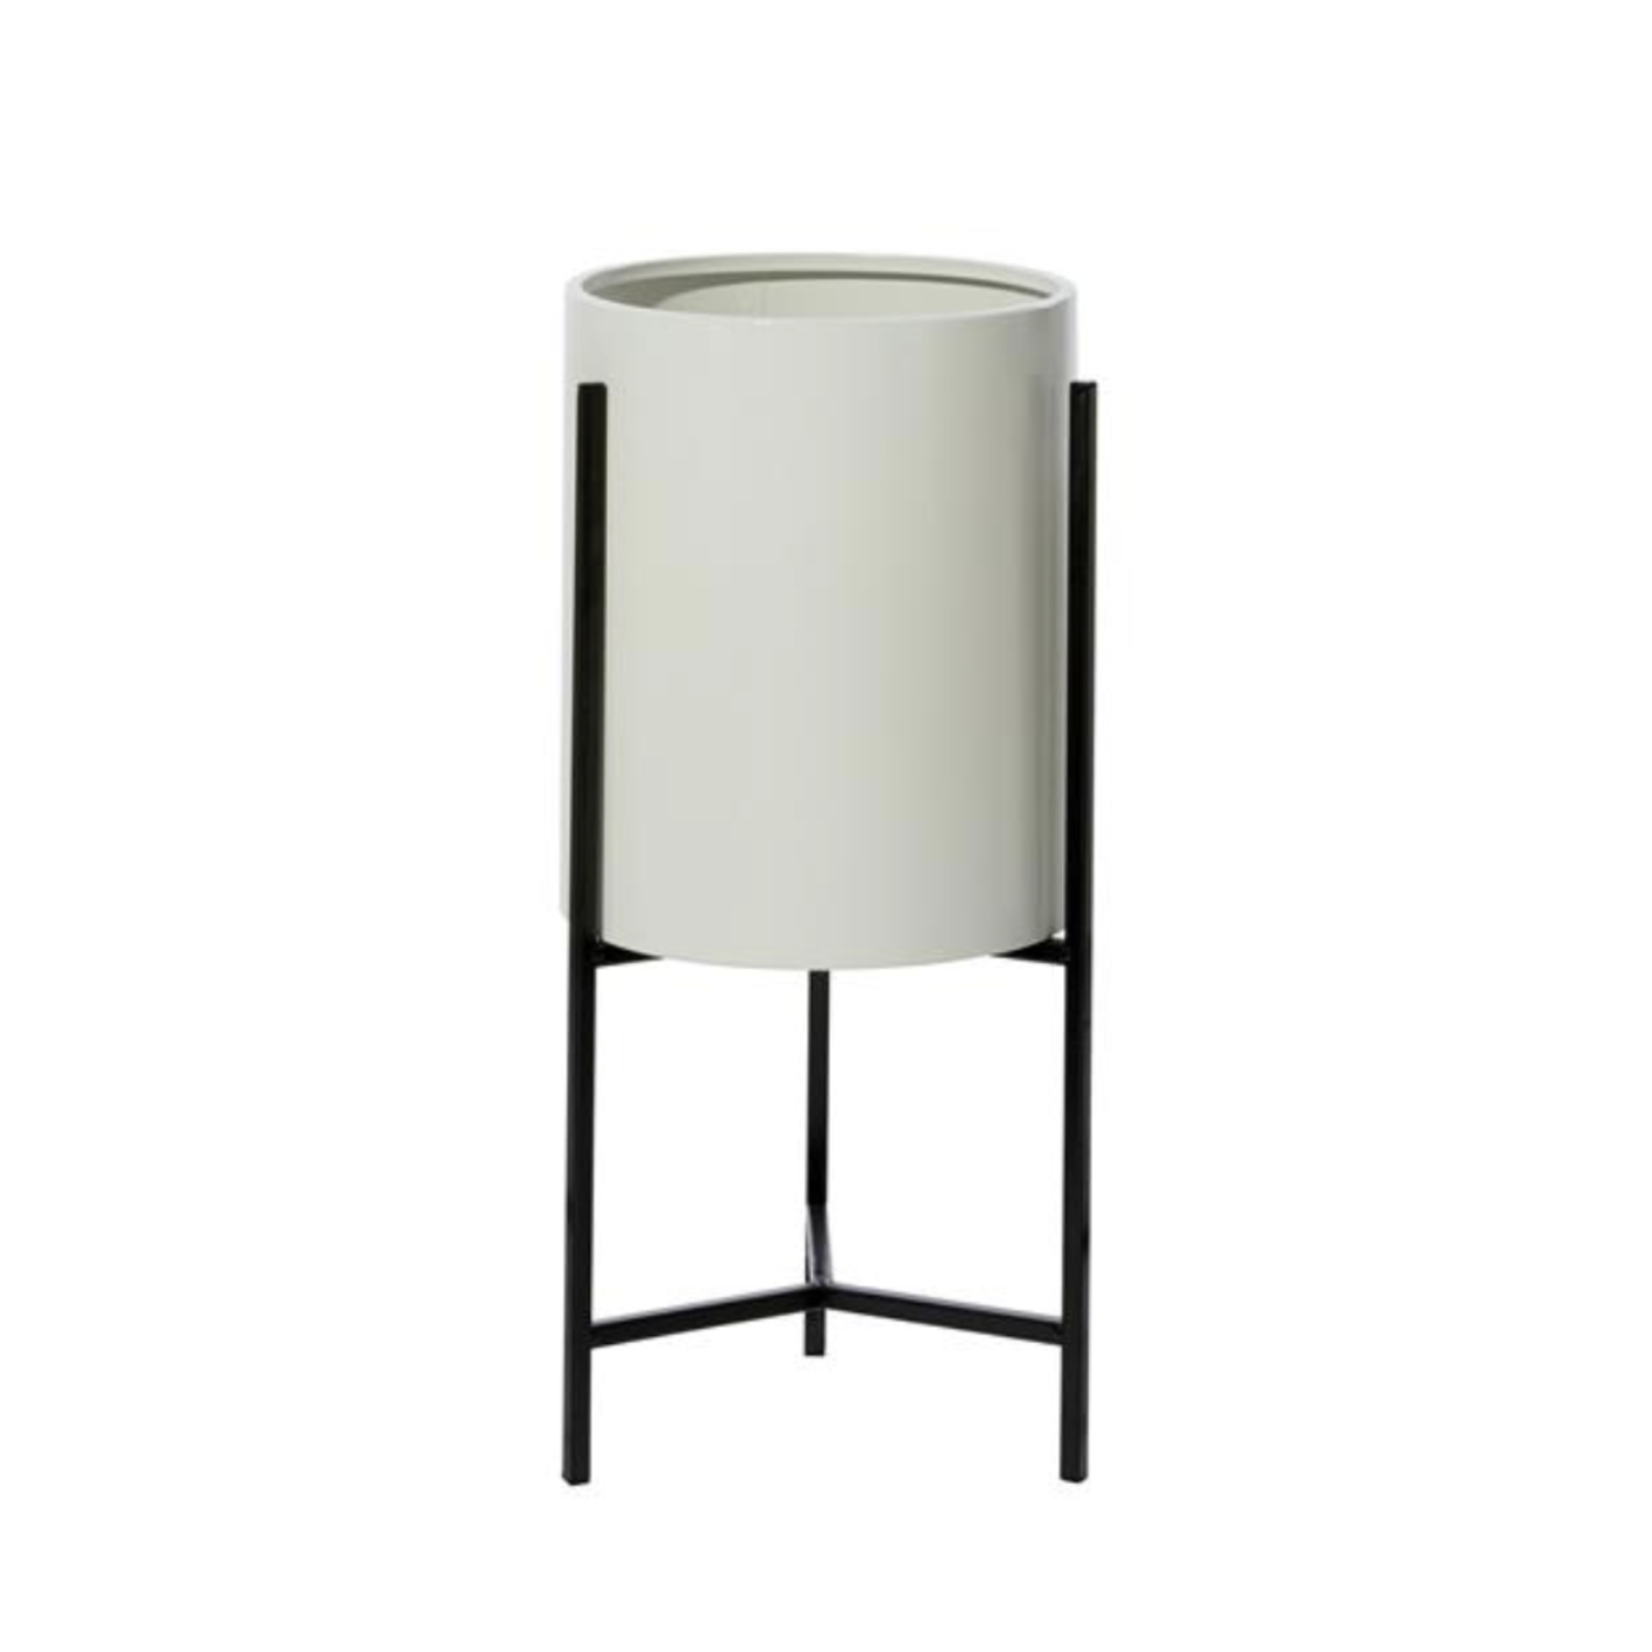 23”H X 10” SMALL GLOSSY CREAM METAL MODERN PLANTER WITH METAL STAND (NOT WATER TIGHT)